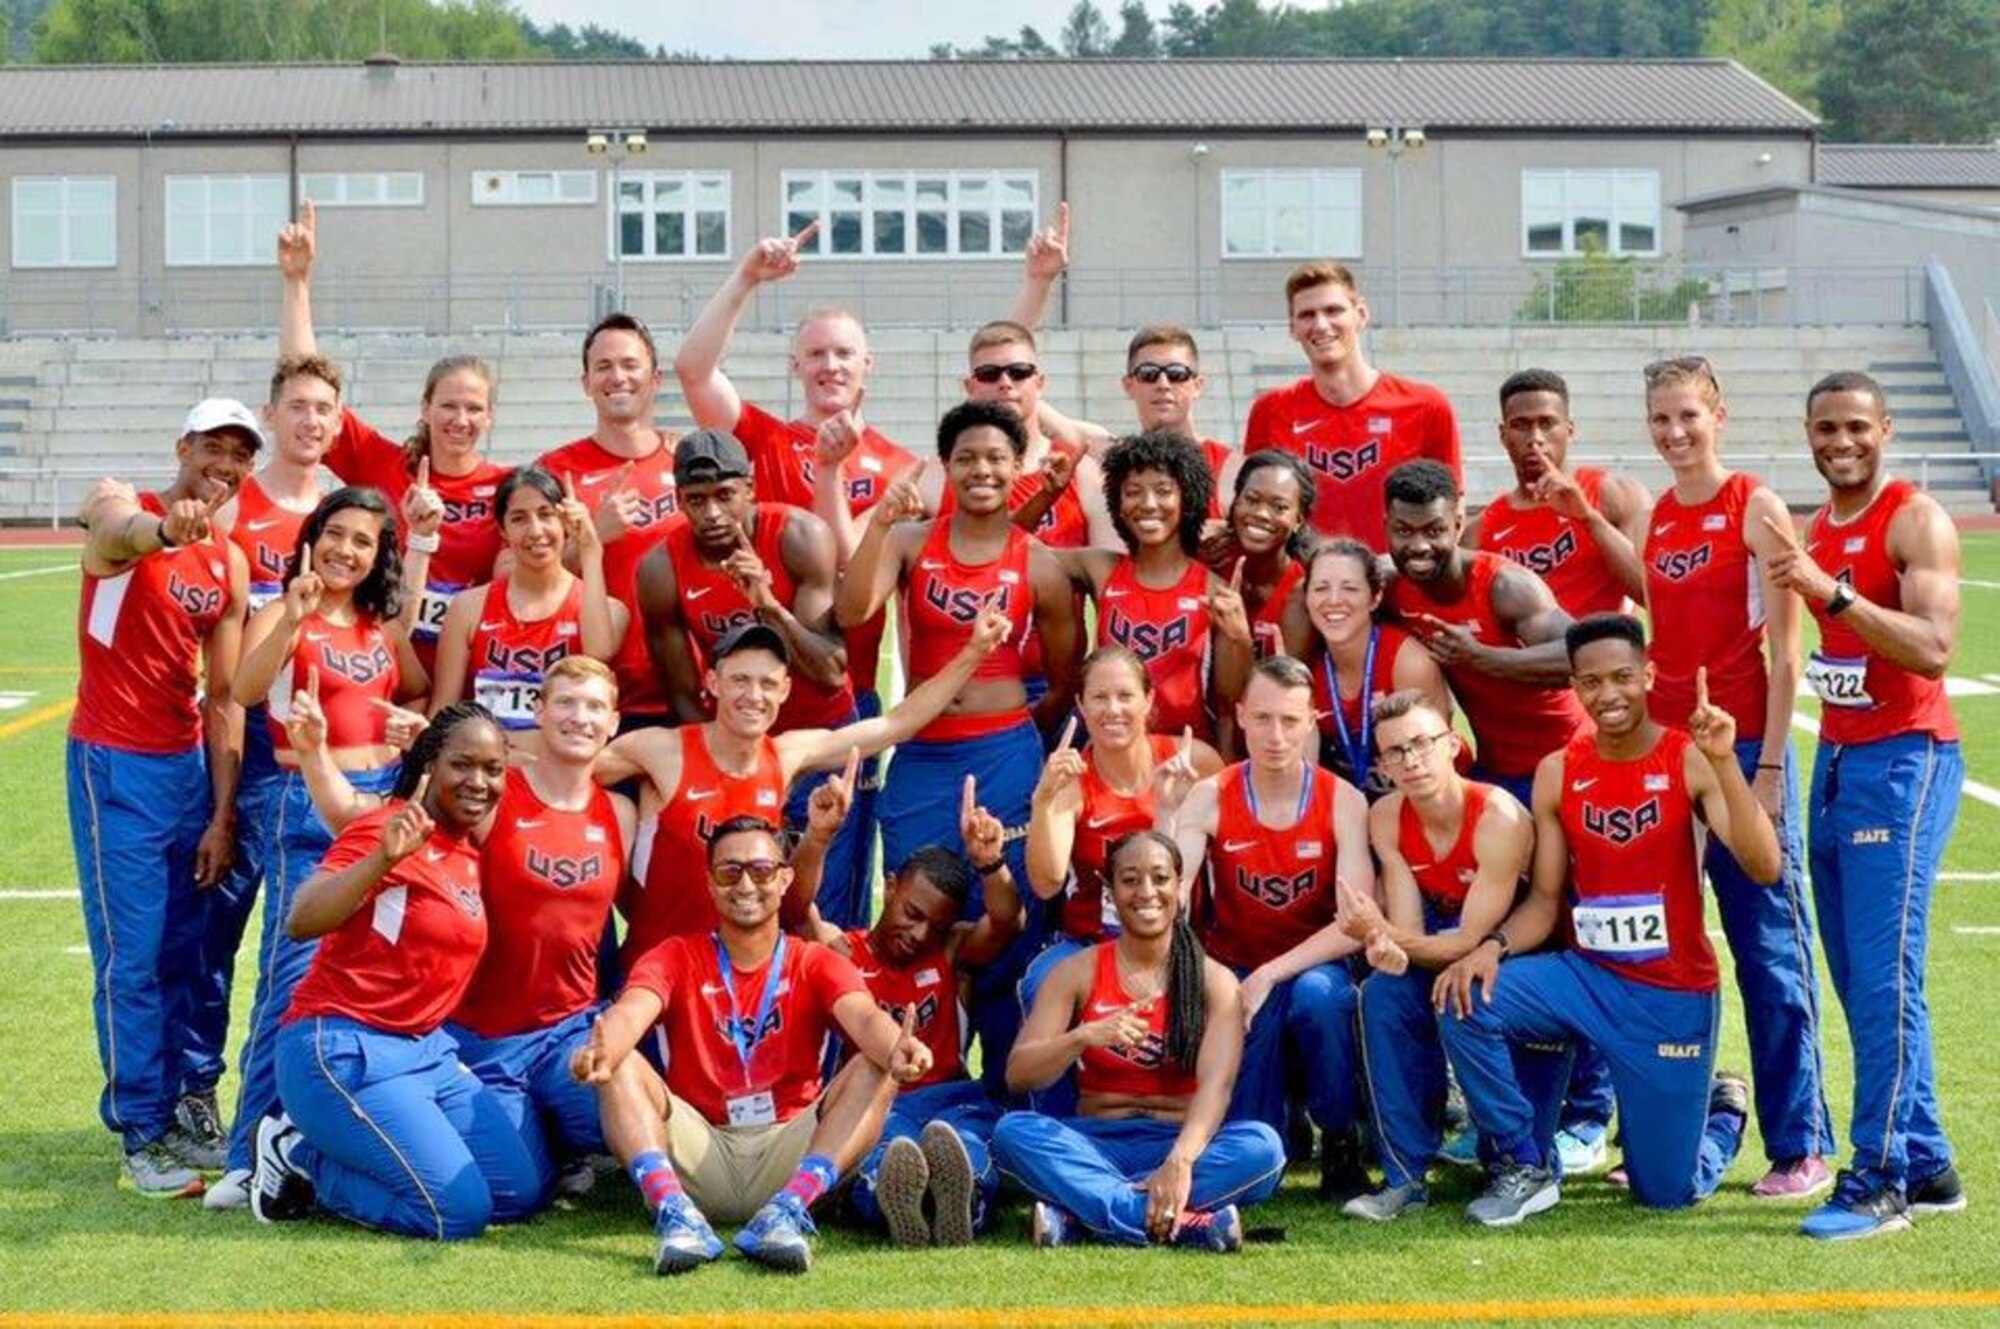 Athletes representing the U.S. Air Force pose for a team photo after the conclusion of the Allied Air Command Inter-Nation Athletics Championship on Vogelweh Military Complex, Germany, June 21, 2017. Both the men’s and women’s teams for the U.S. won over six other countries’ representatives to take first place in the competition. (Photo courtesy of Staff Sgt. Emesh Fernando)